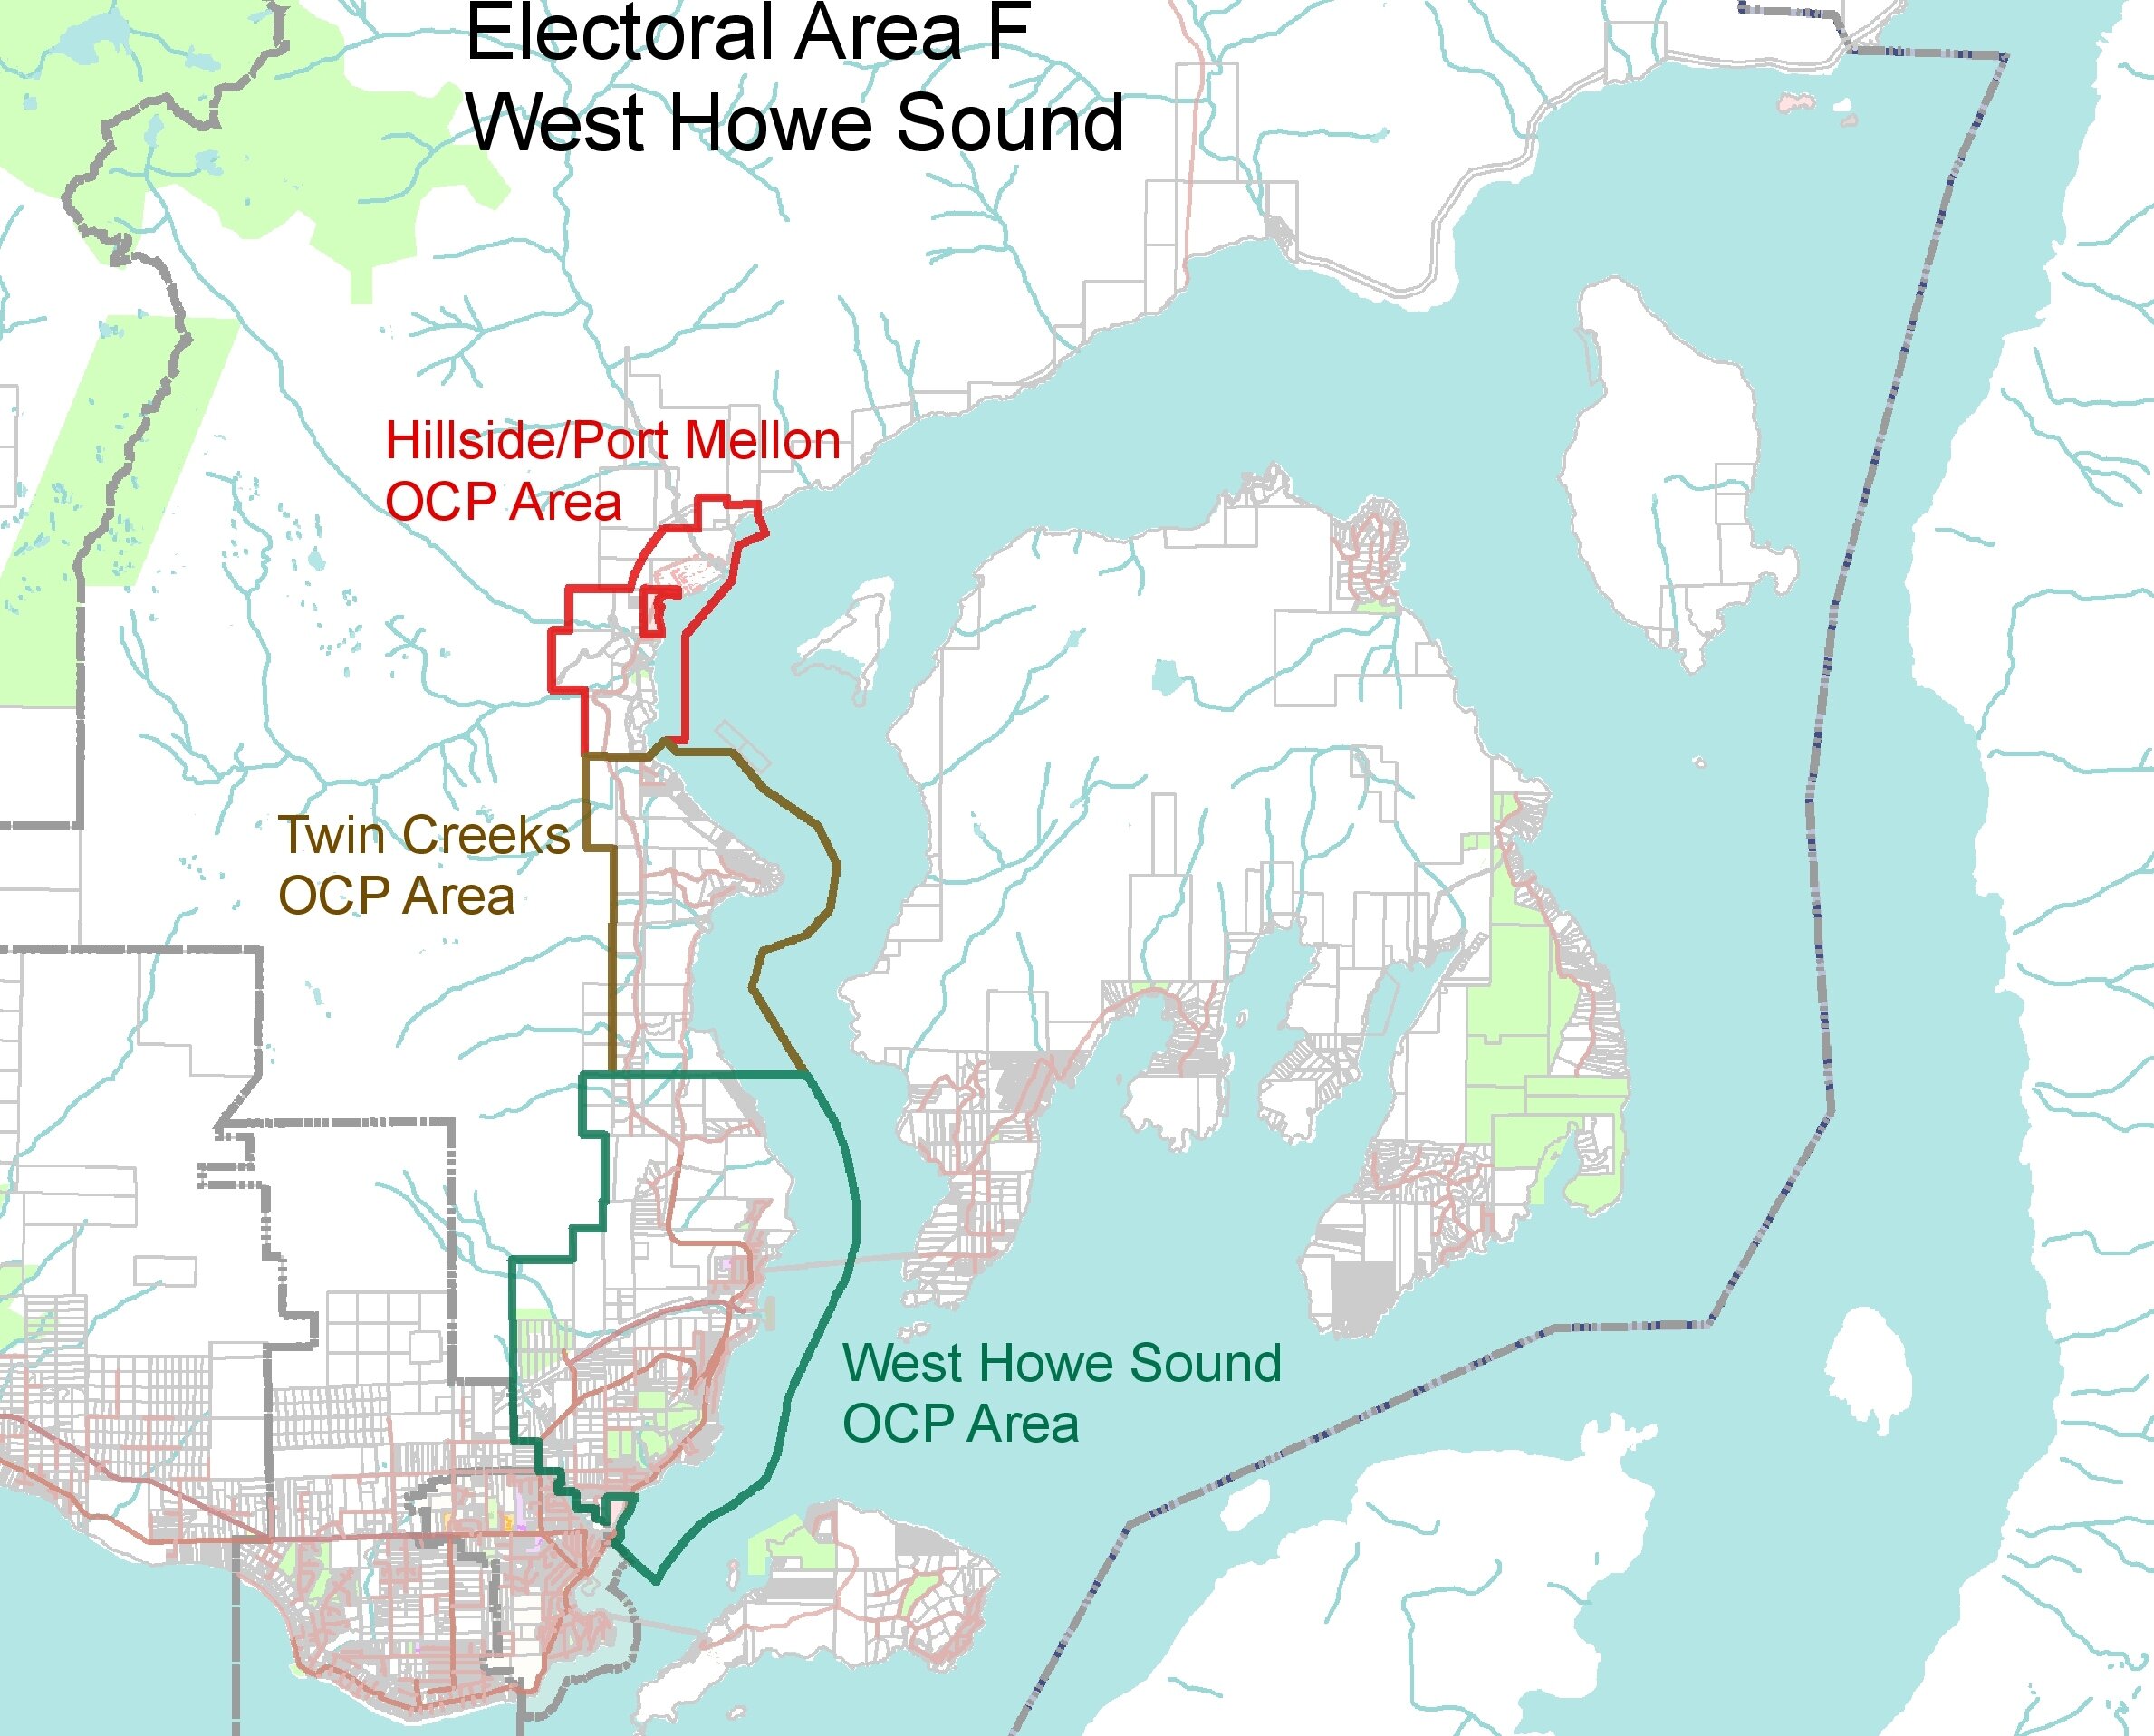 Electoral Area F West Howe Sound